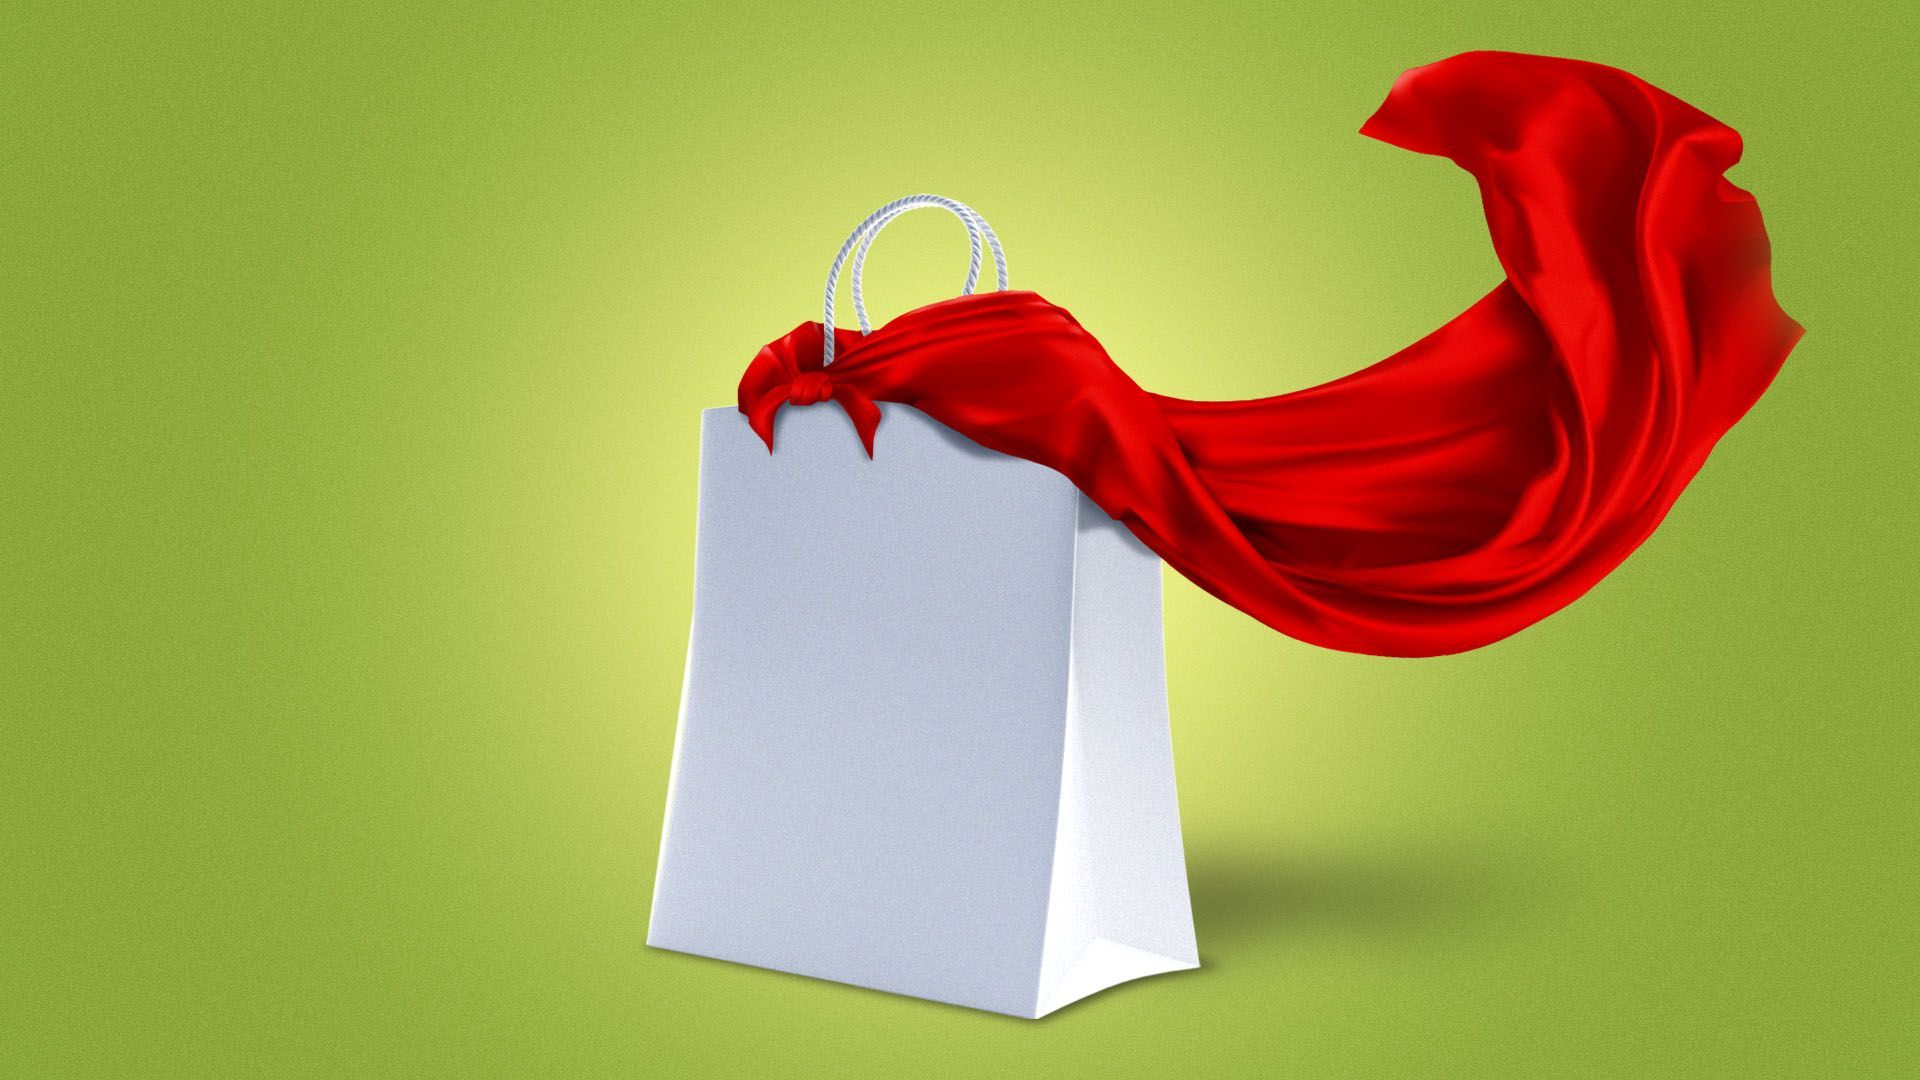 Illustration of a shopping bag wearing a red superhero cape